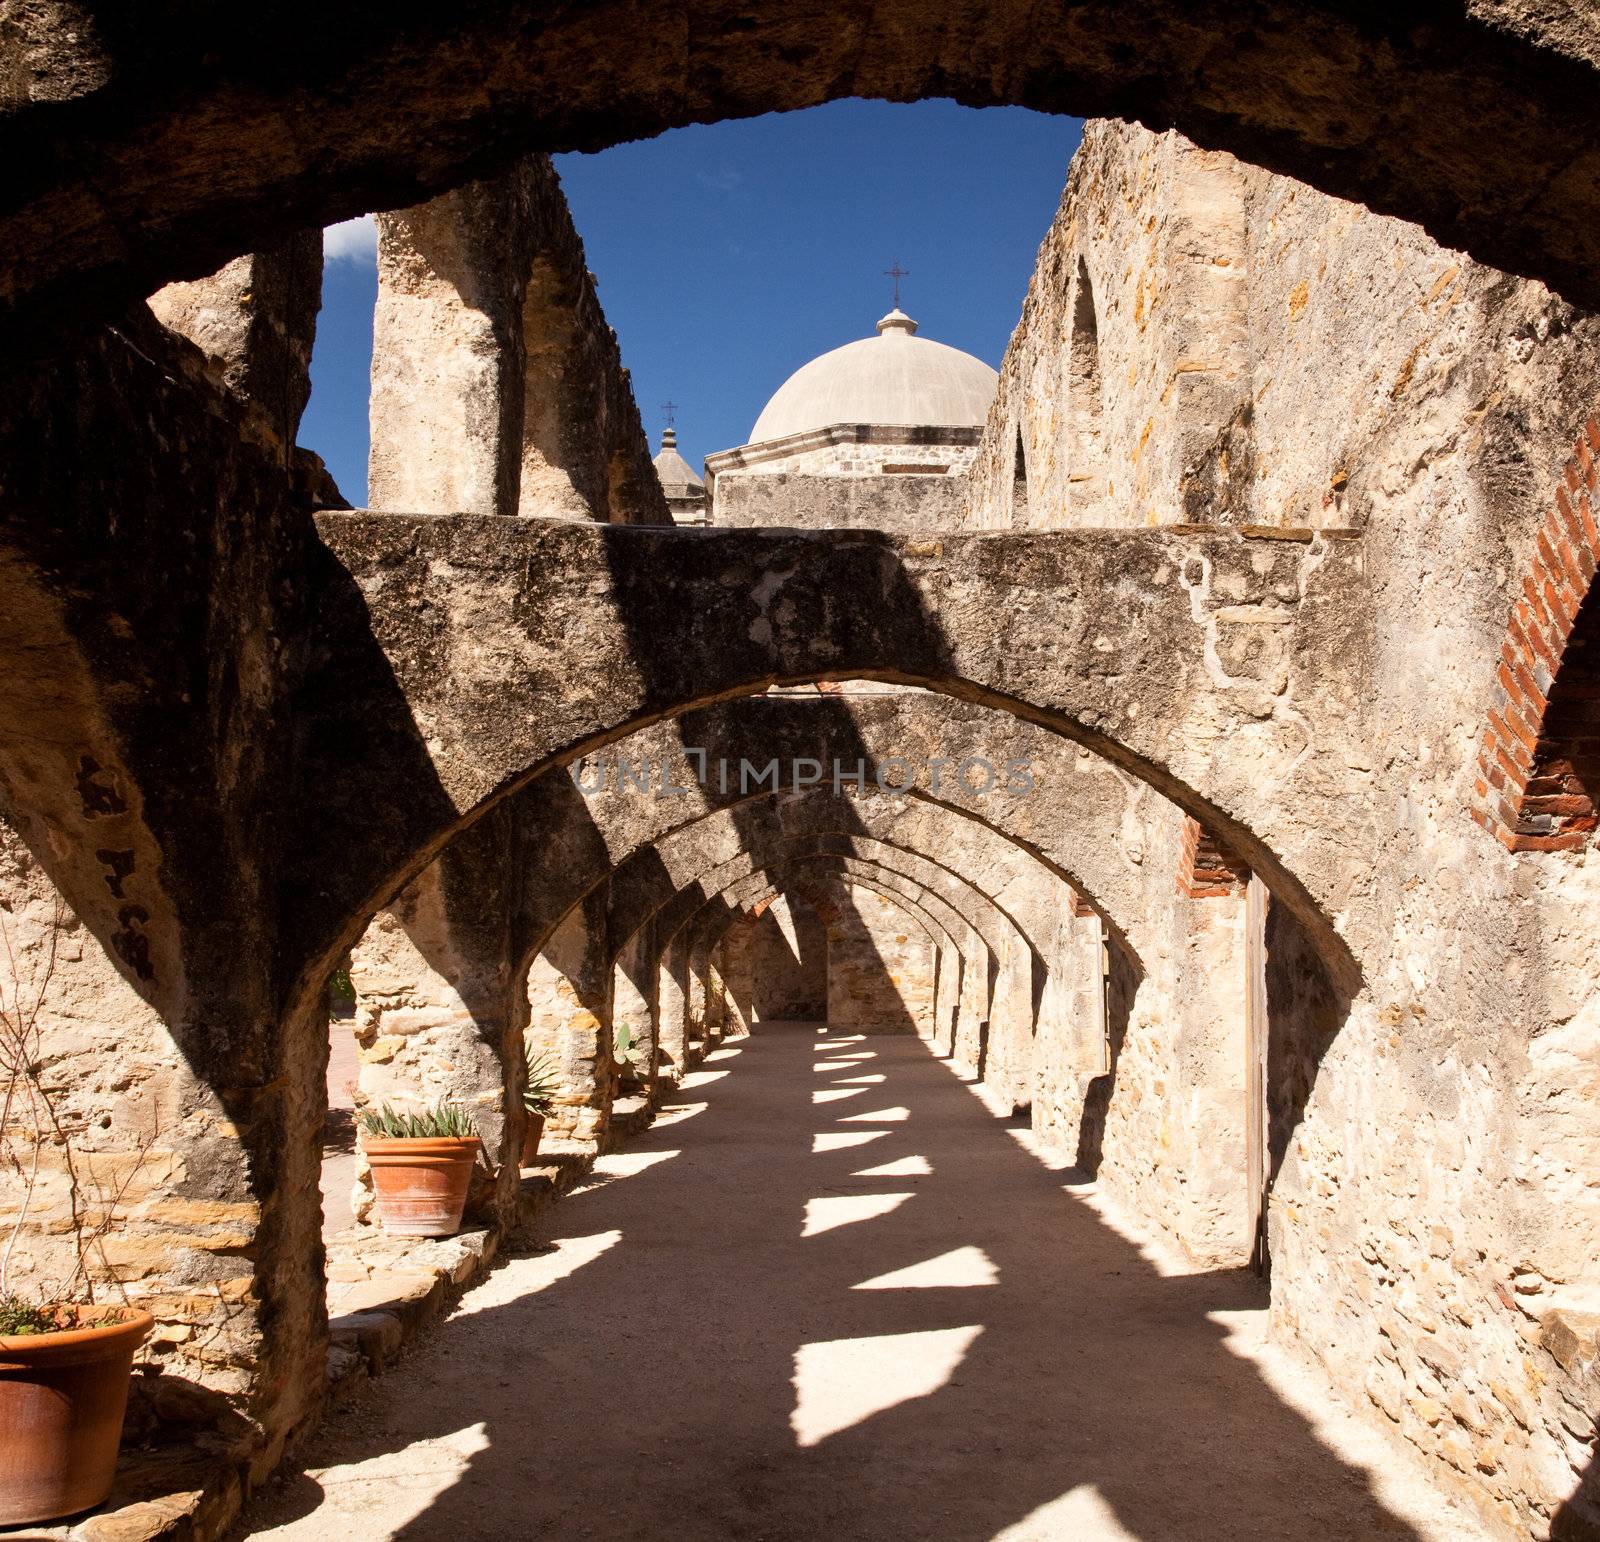 View of the arches leading to the San Juan Mission in San Antonio